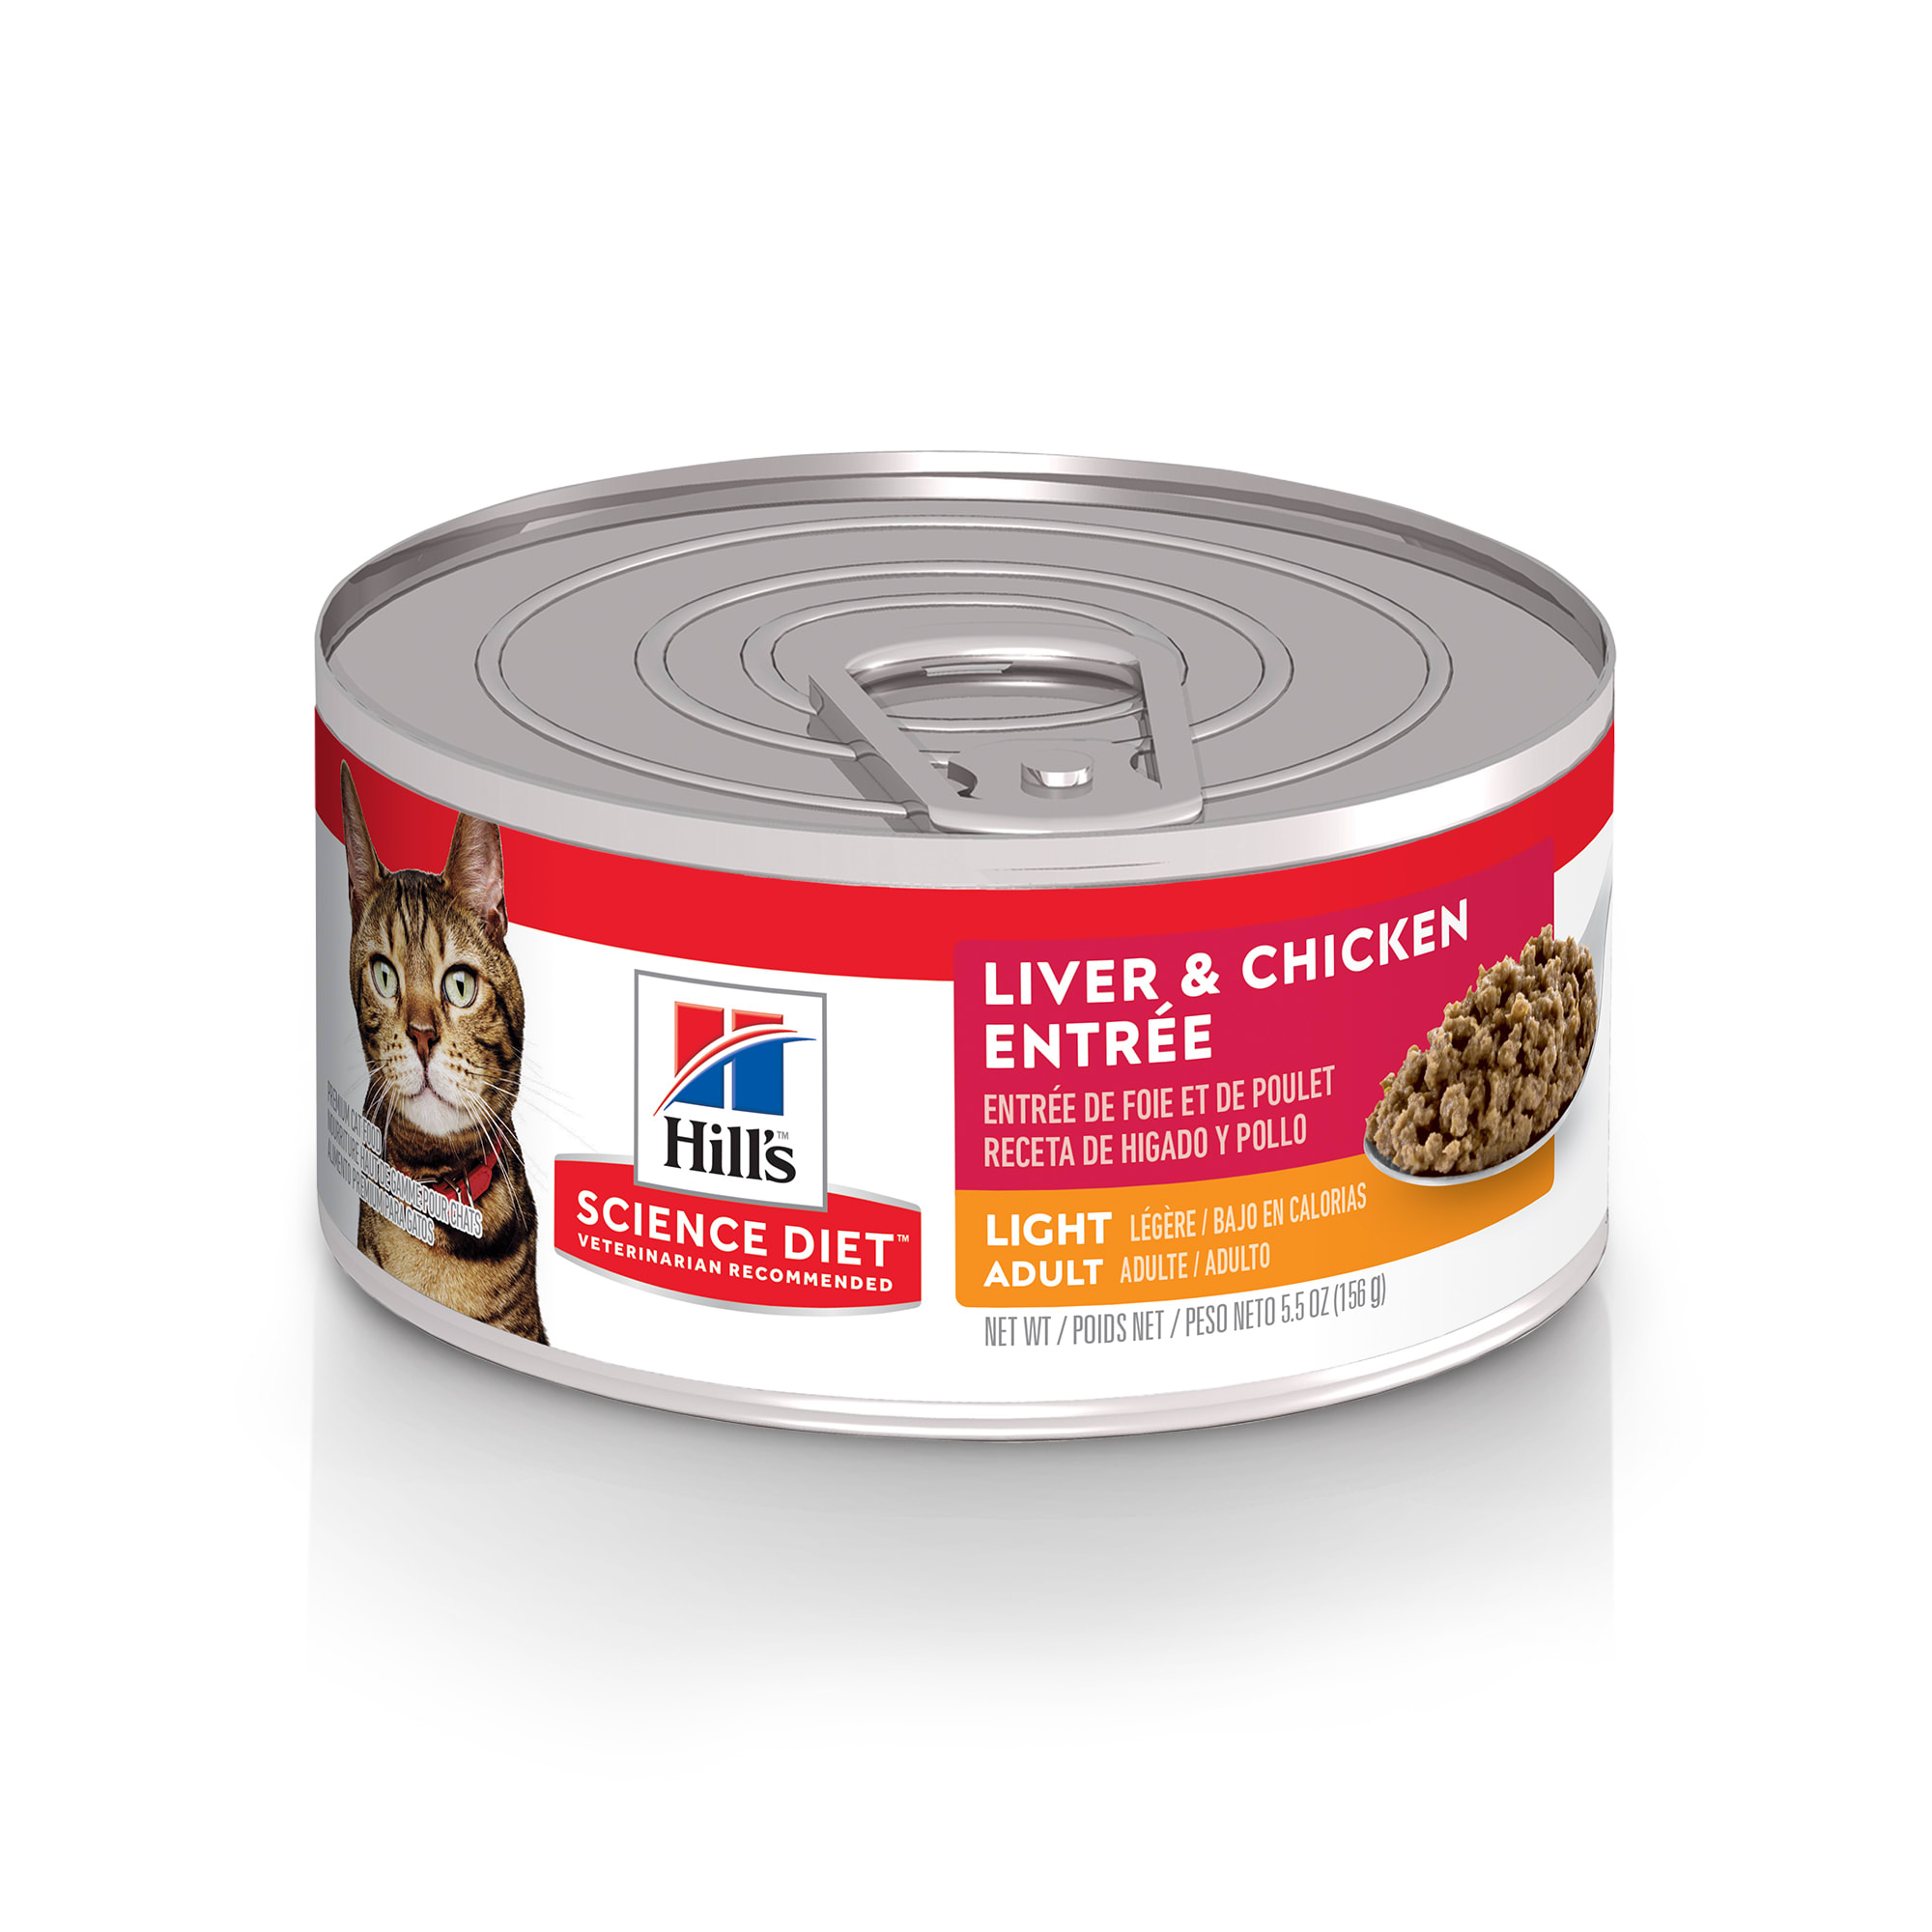 Hill's Science Diet Adult Light Liver & Chicken Entree Canned Cat Food